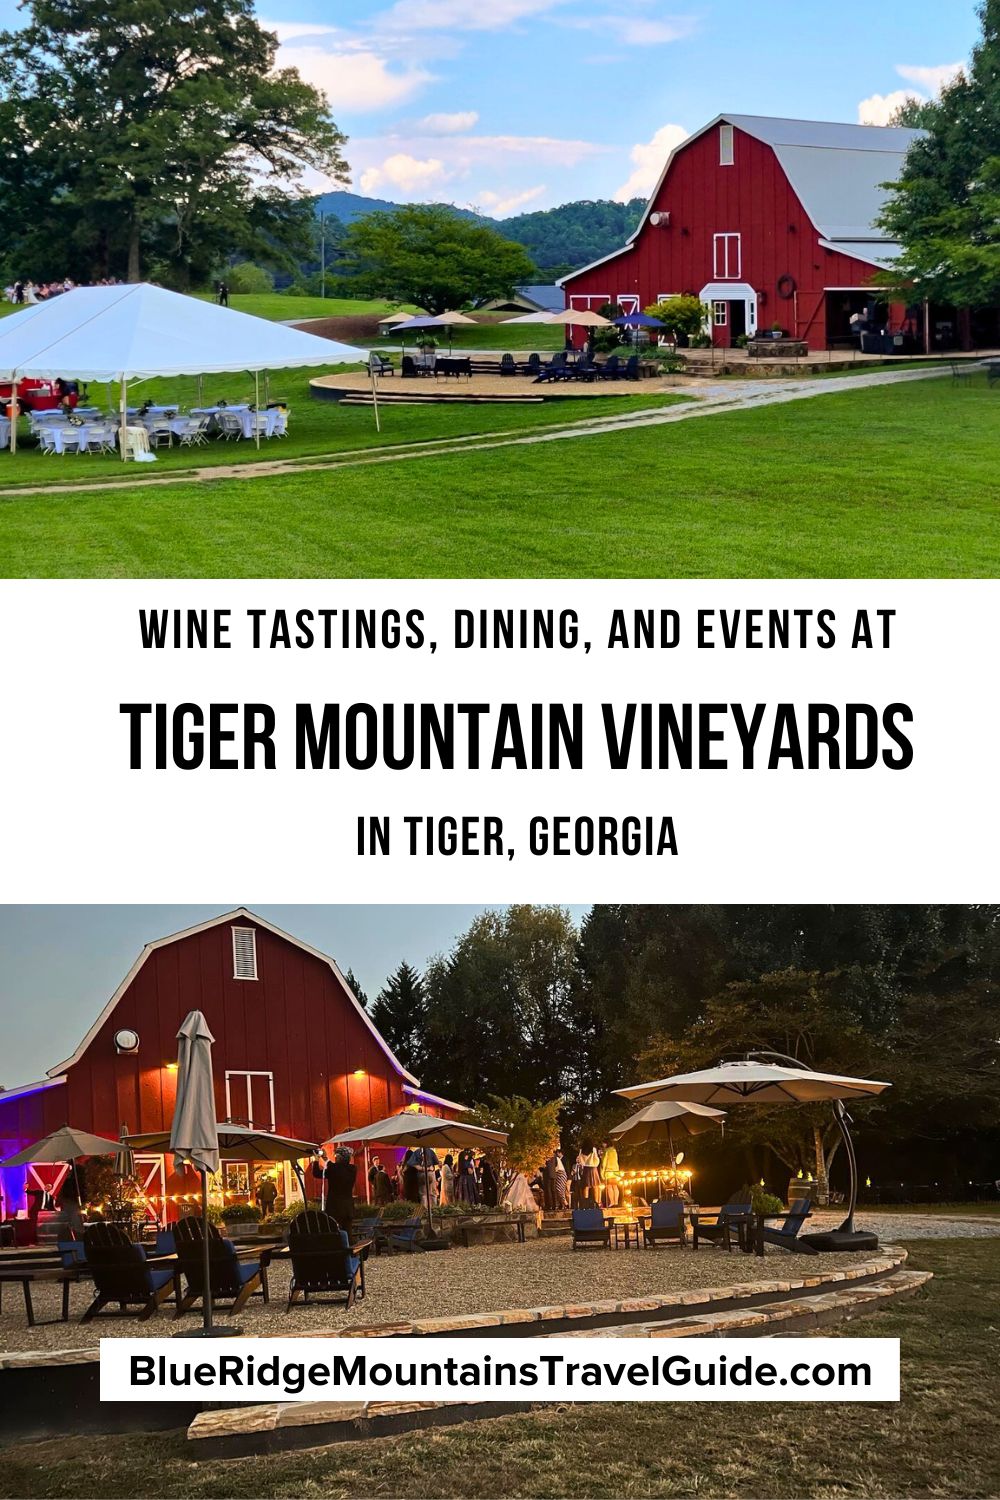 A guide to visiting Tiger Mountain Vineyards in Tiger GA, including the property's history, wine tastings, dining options, and other special events. 